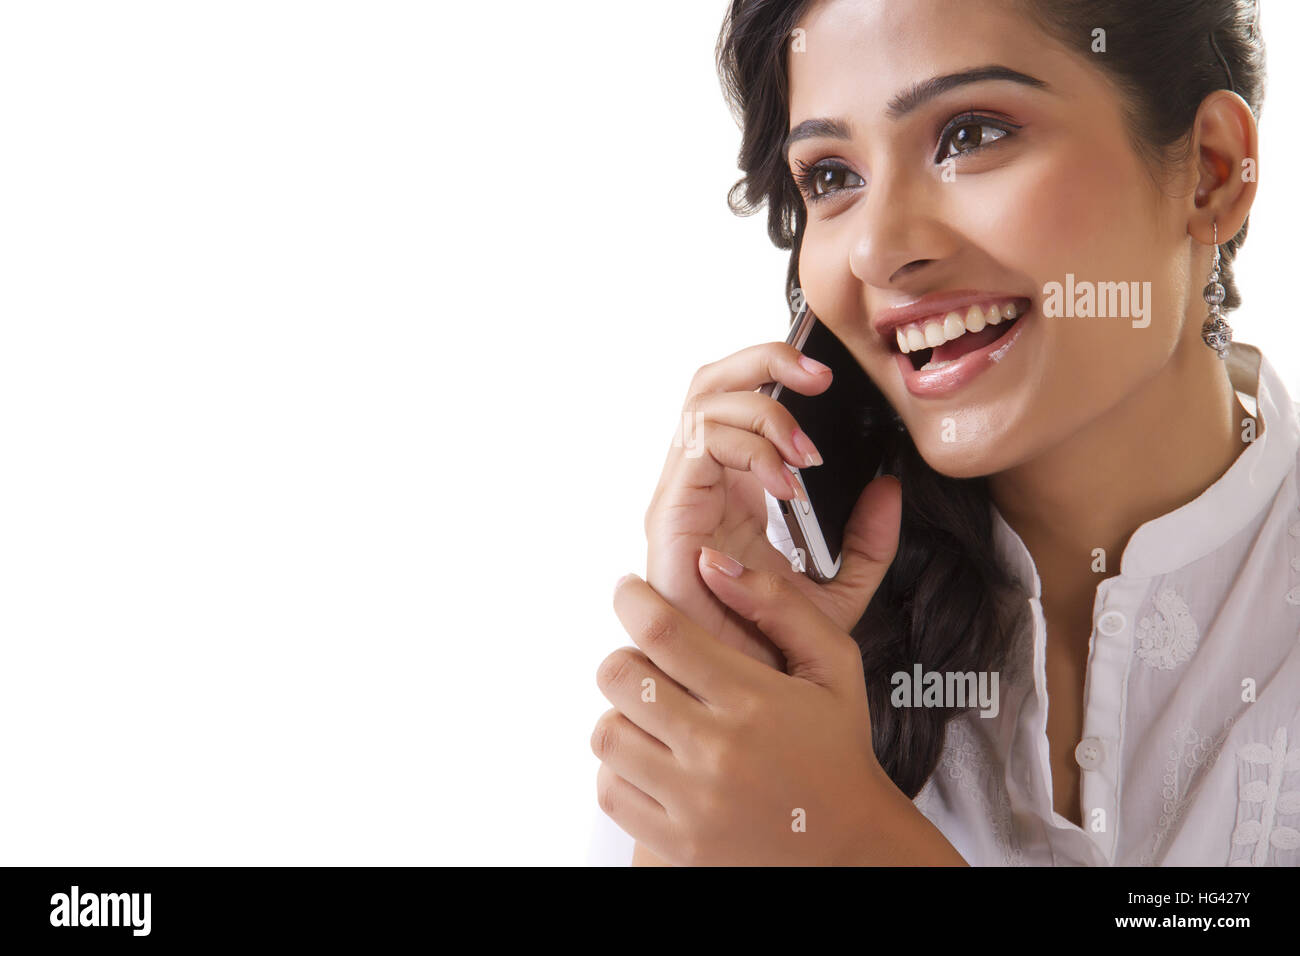 Beautiful young woman talking on mobile phone Stock Photo